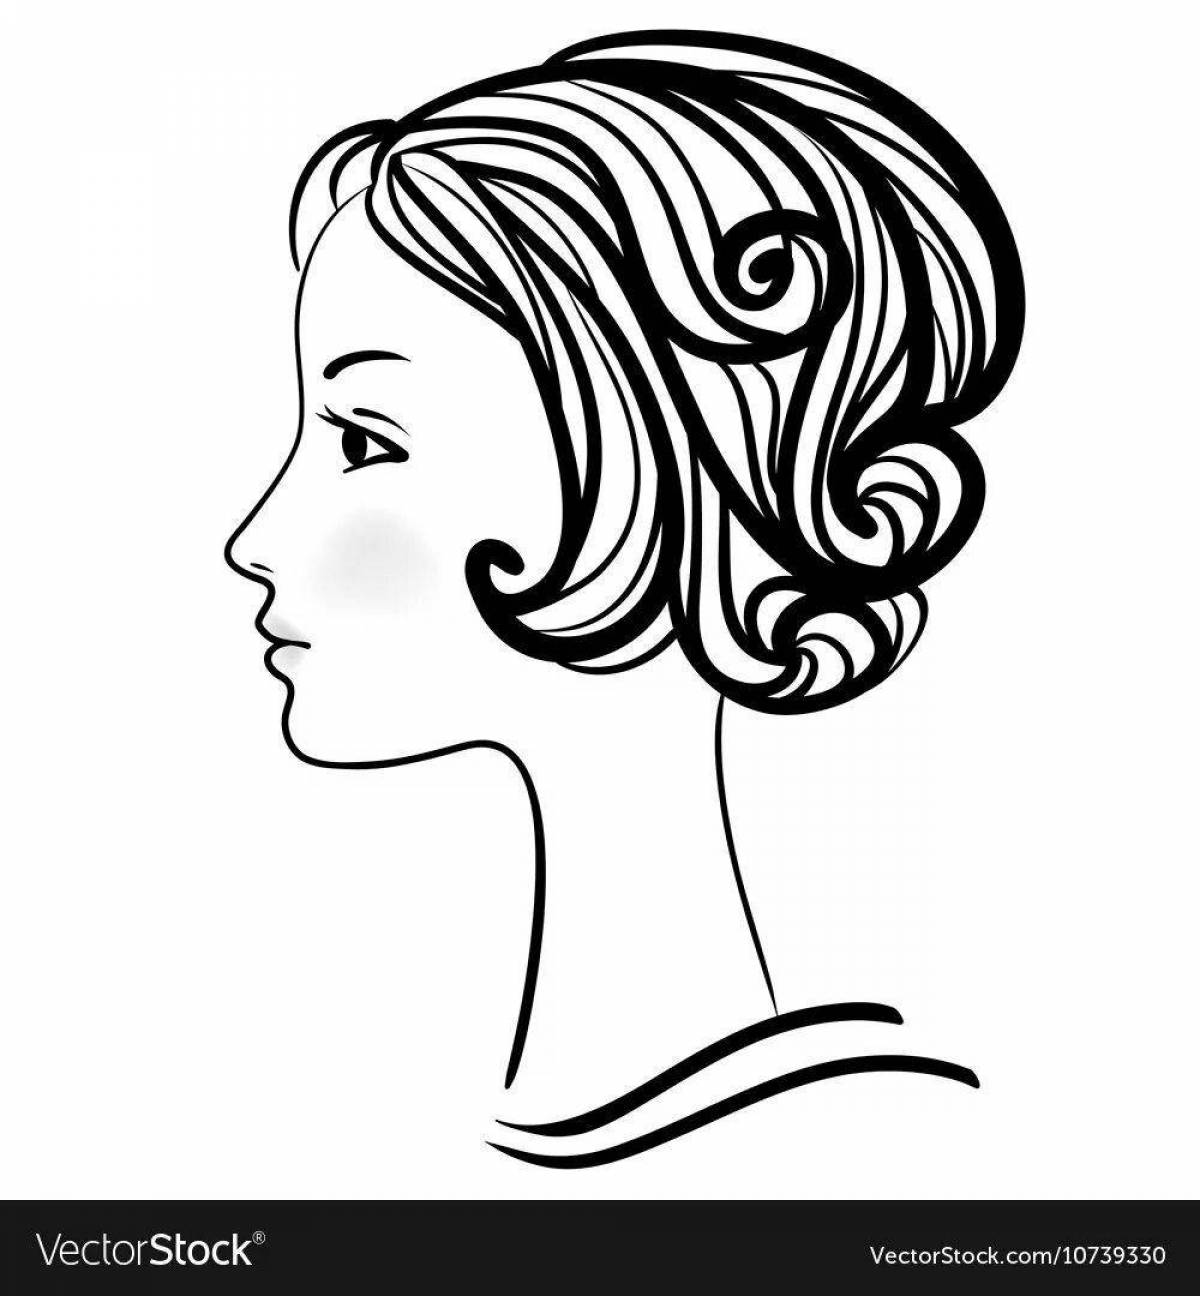 Coloring page of face with radiant profile